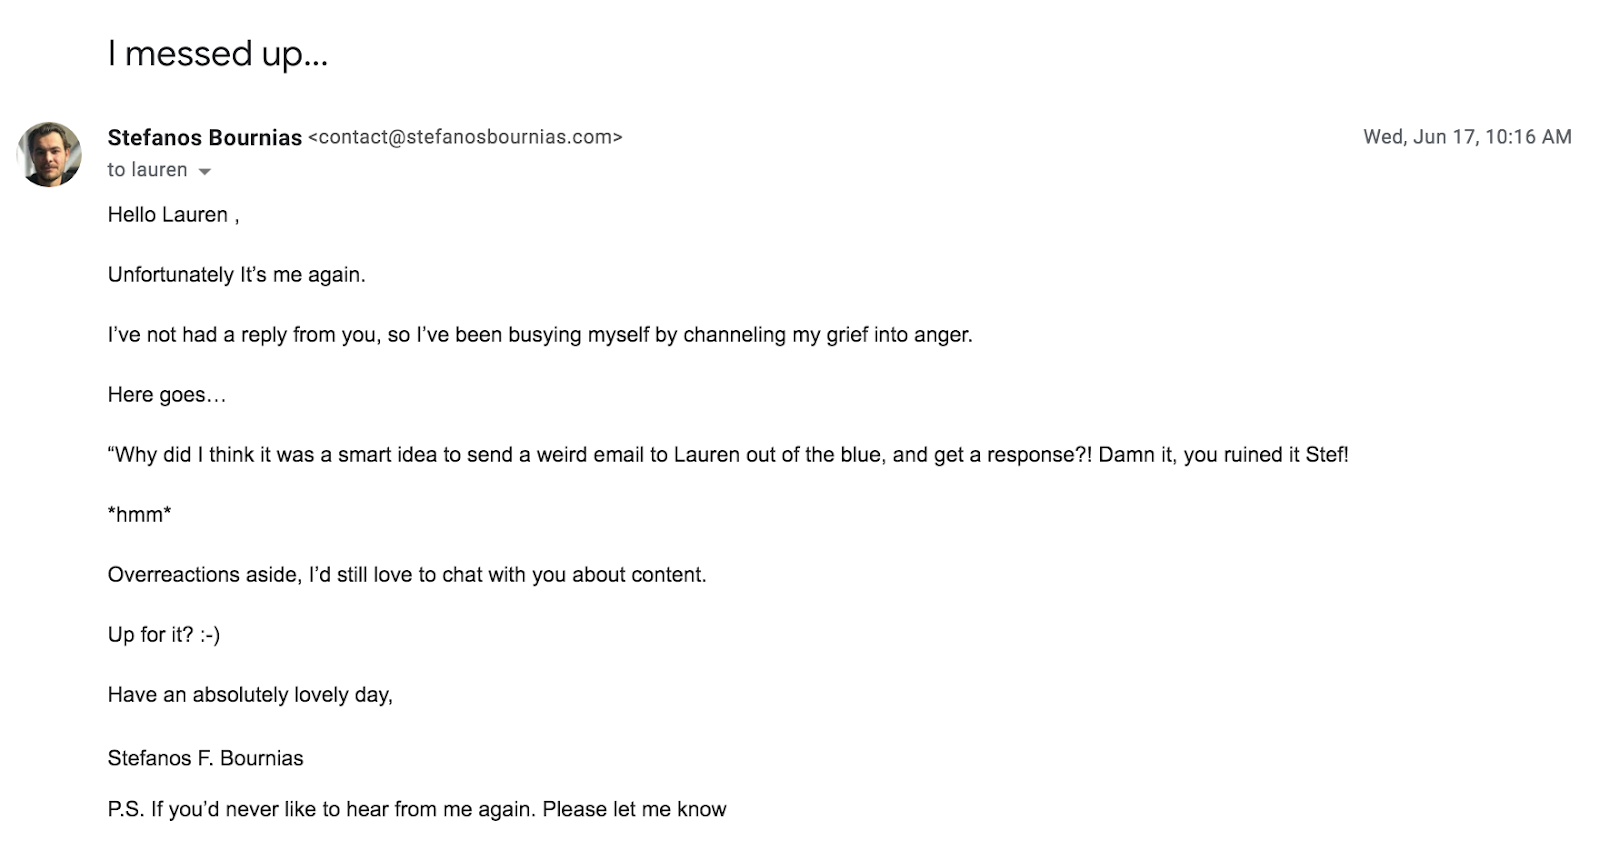 second follow-up email to Lauren